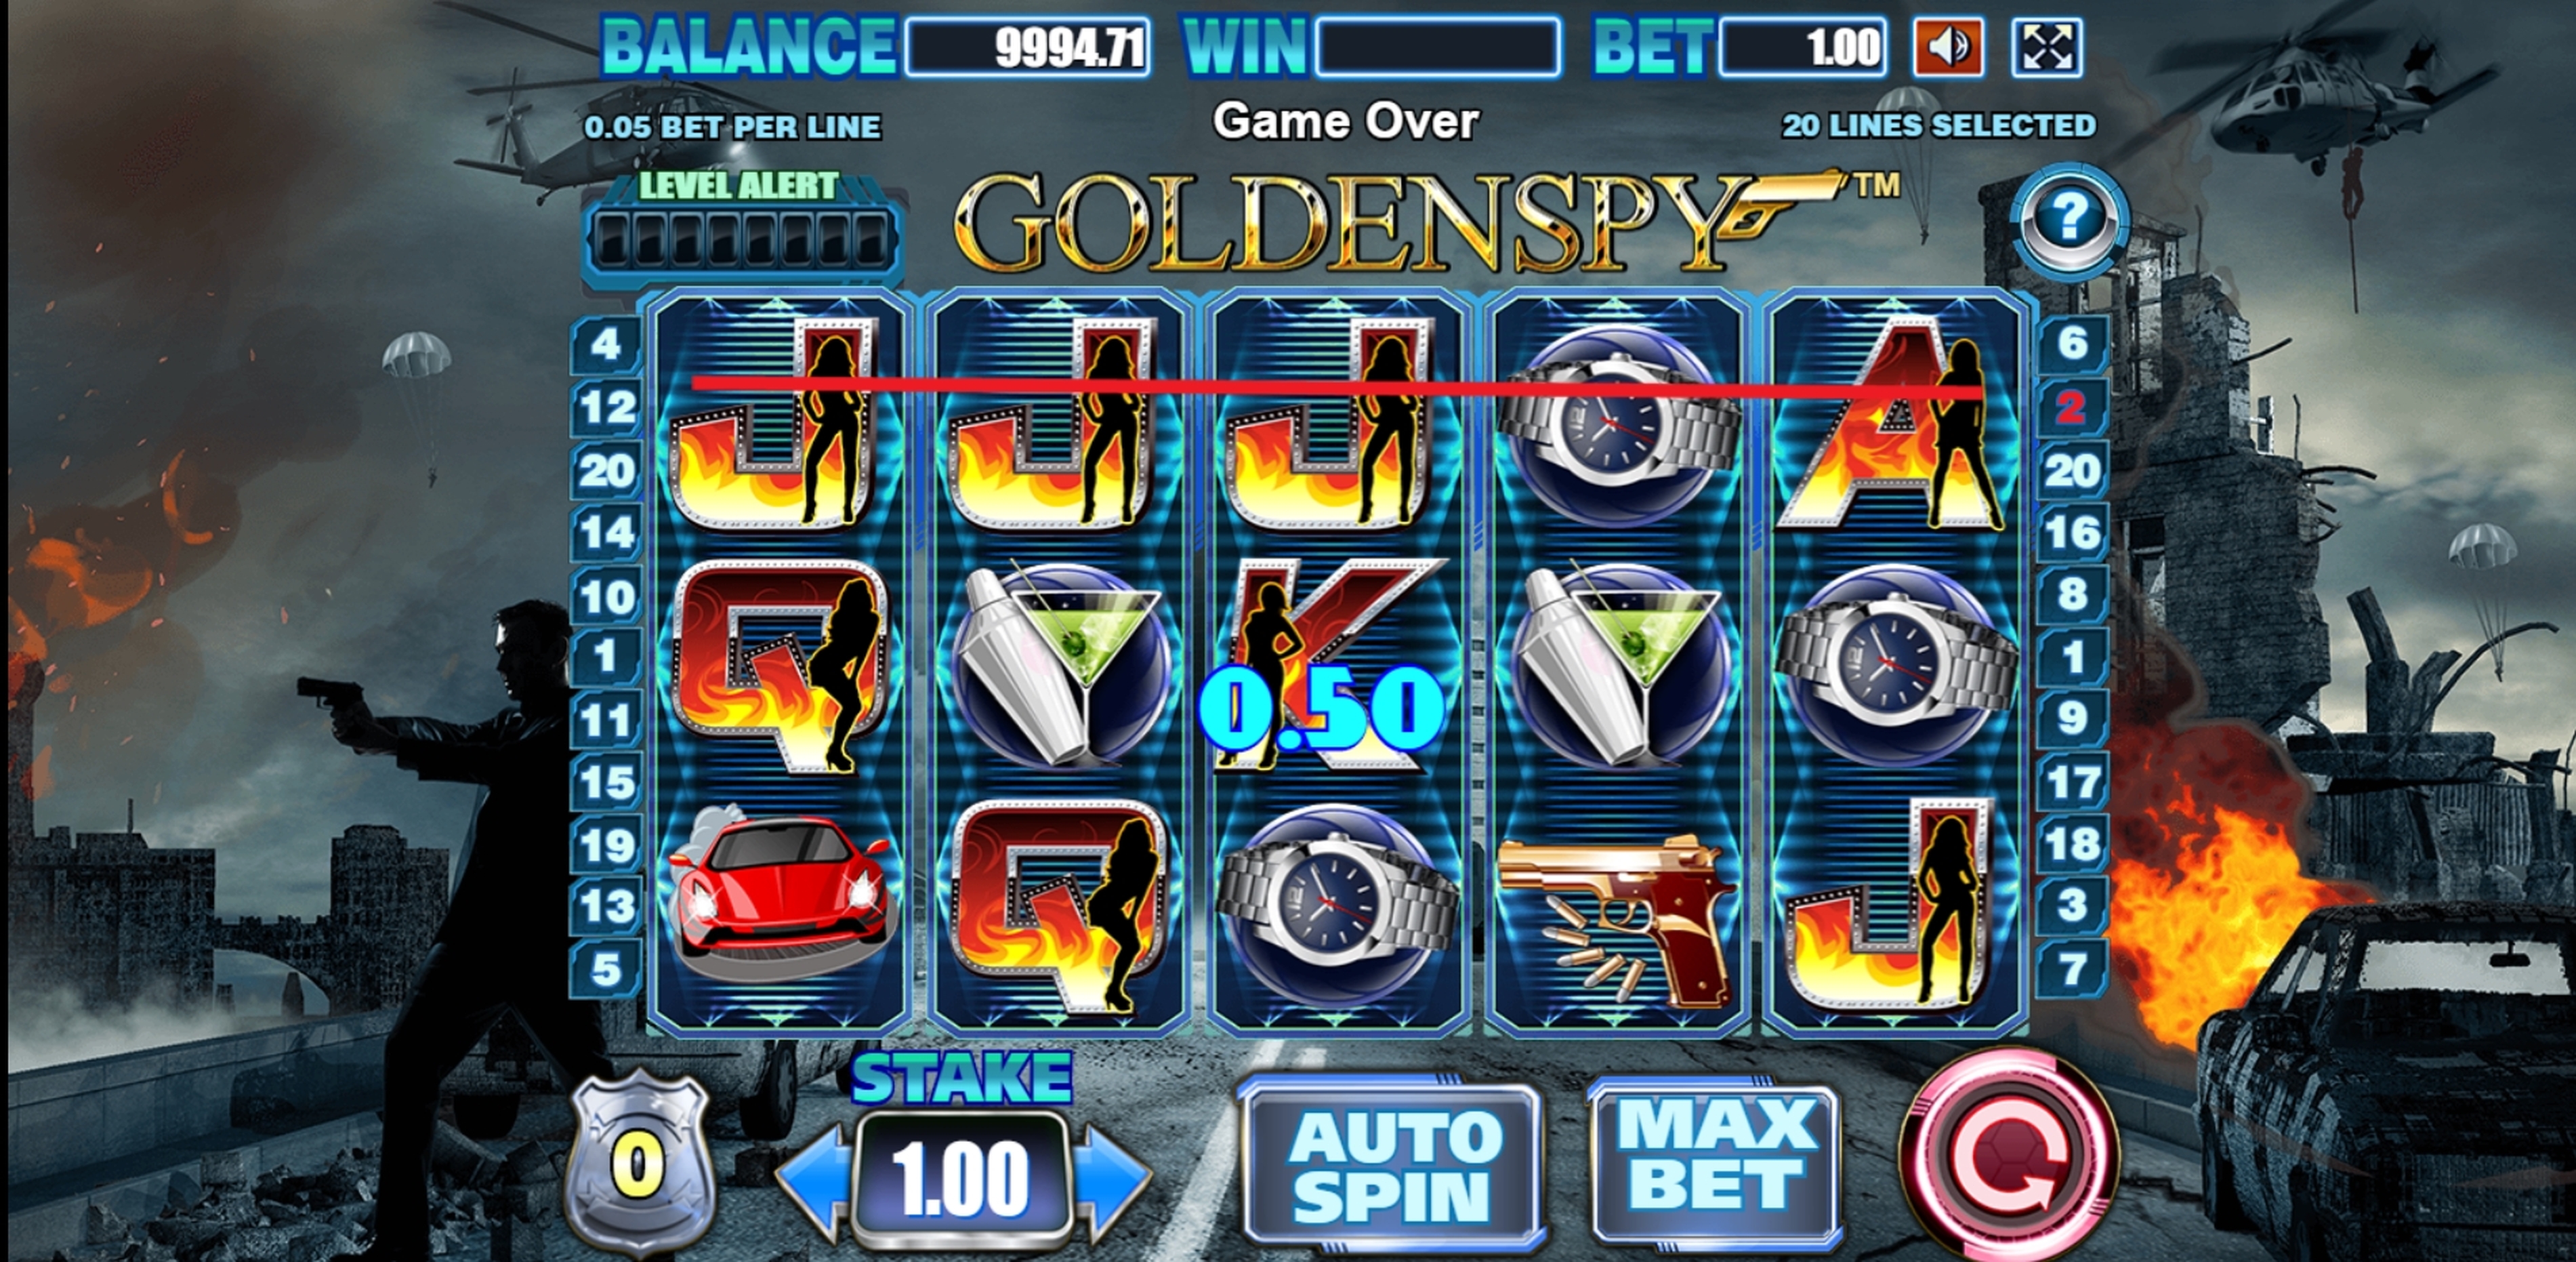 Win Money in Golden Spy Free Slot Game by Allbet Gaming